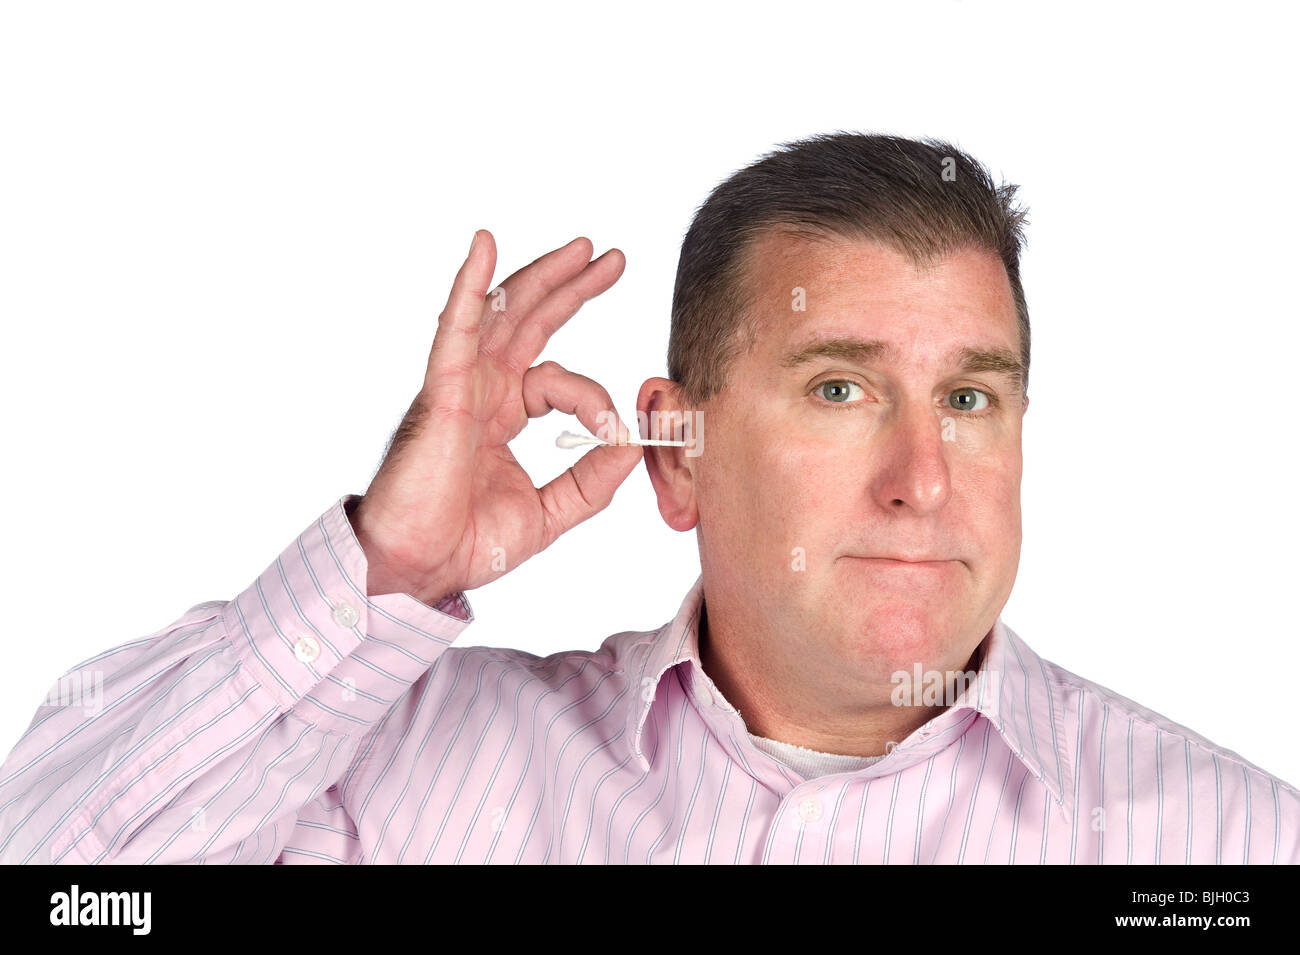 A middle aged man cleans his ear with a cotton swab. Stock Photo